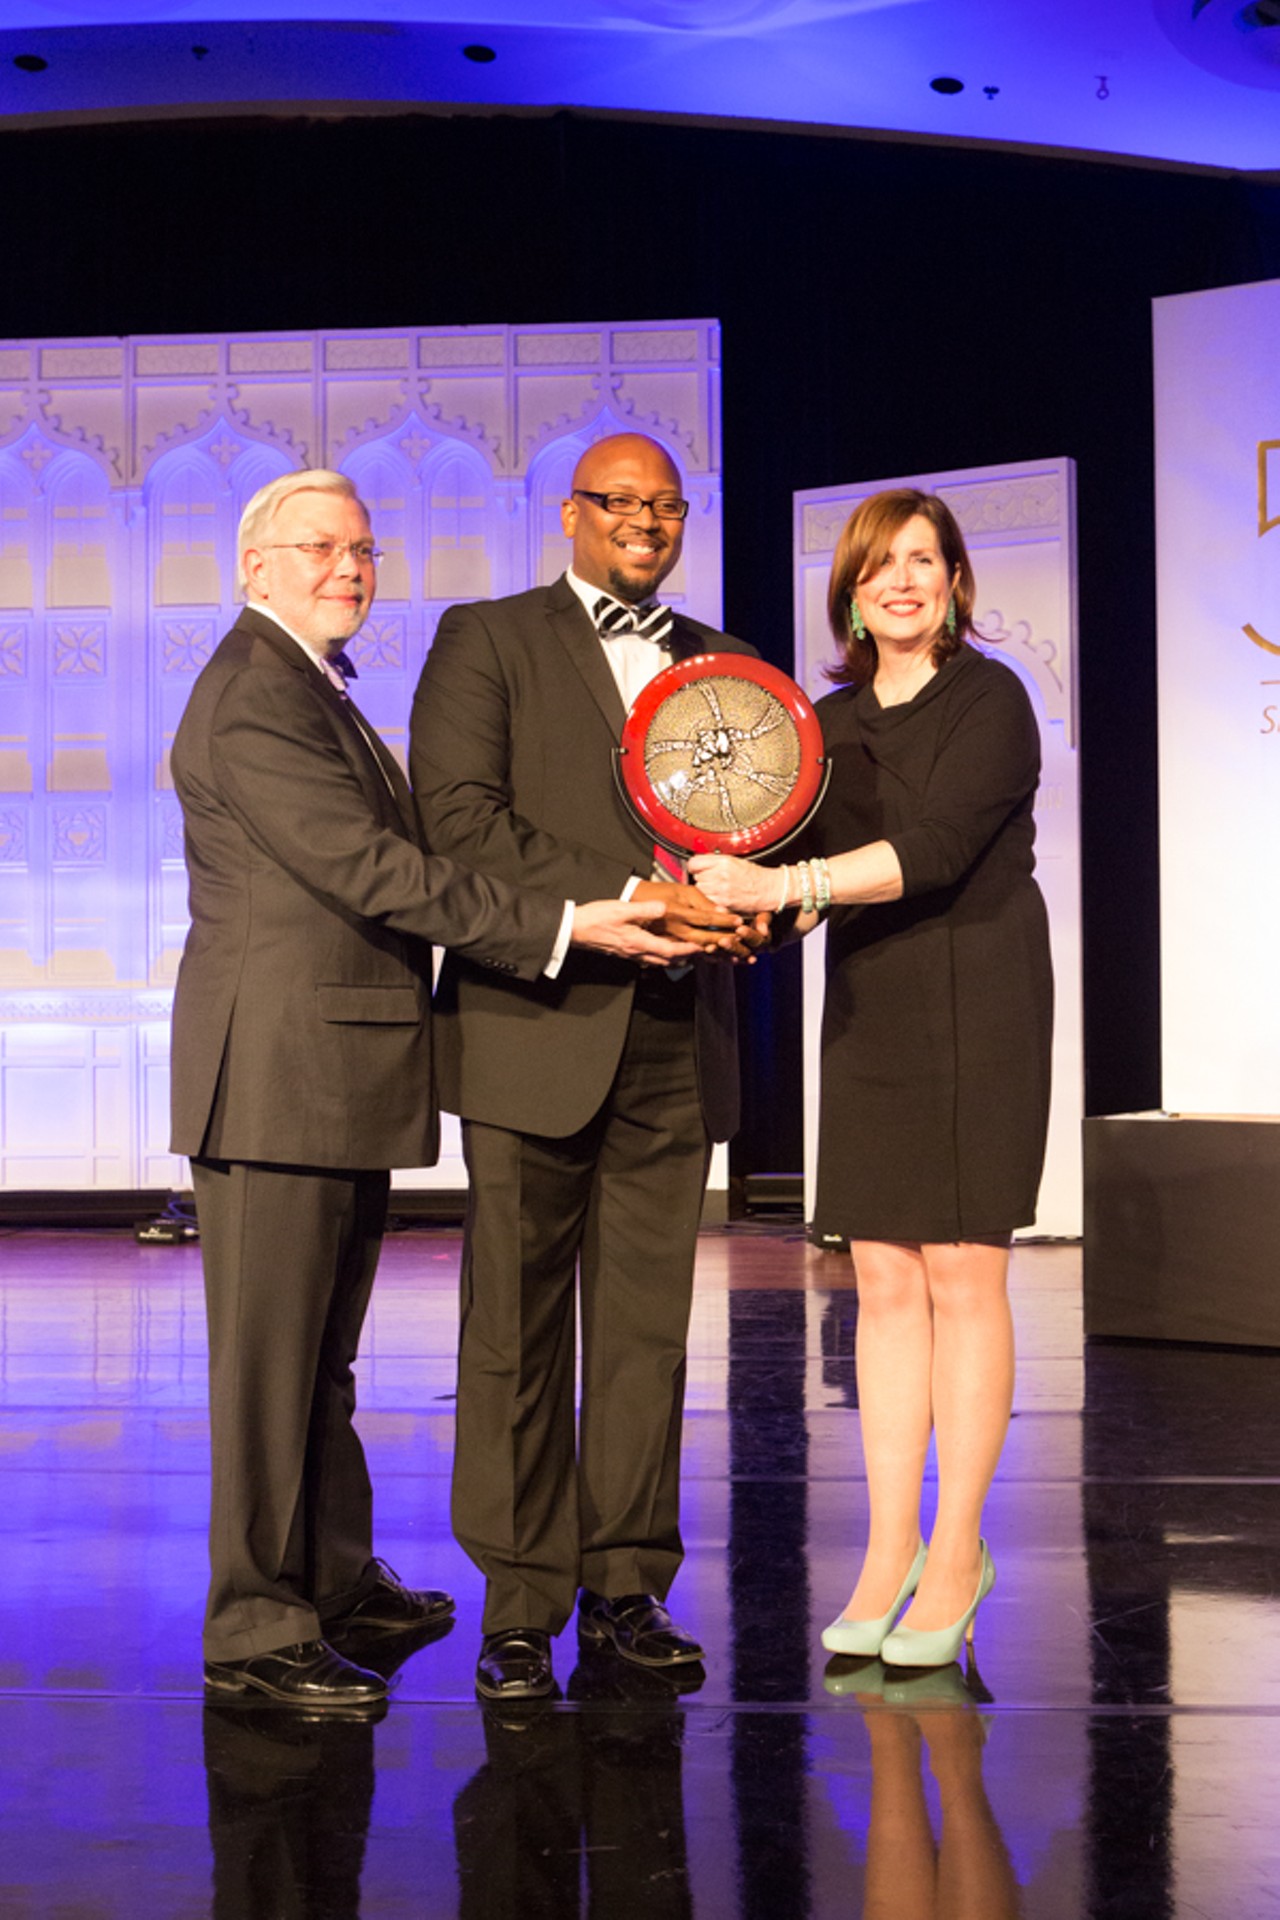 Duane Martin Foster, Choir Director for Normandy High School, accepts the award for Art Educator of the Year.